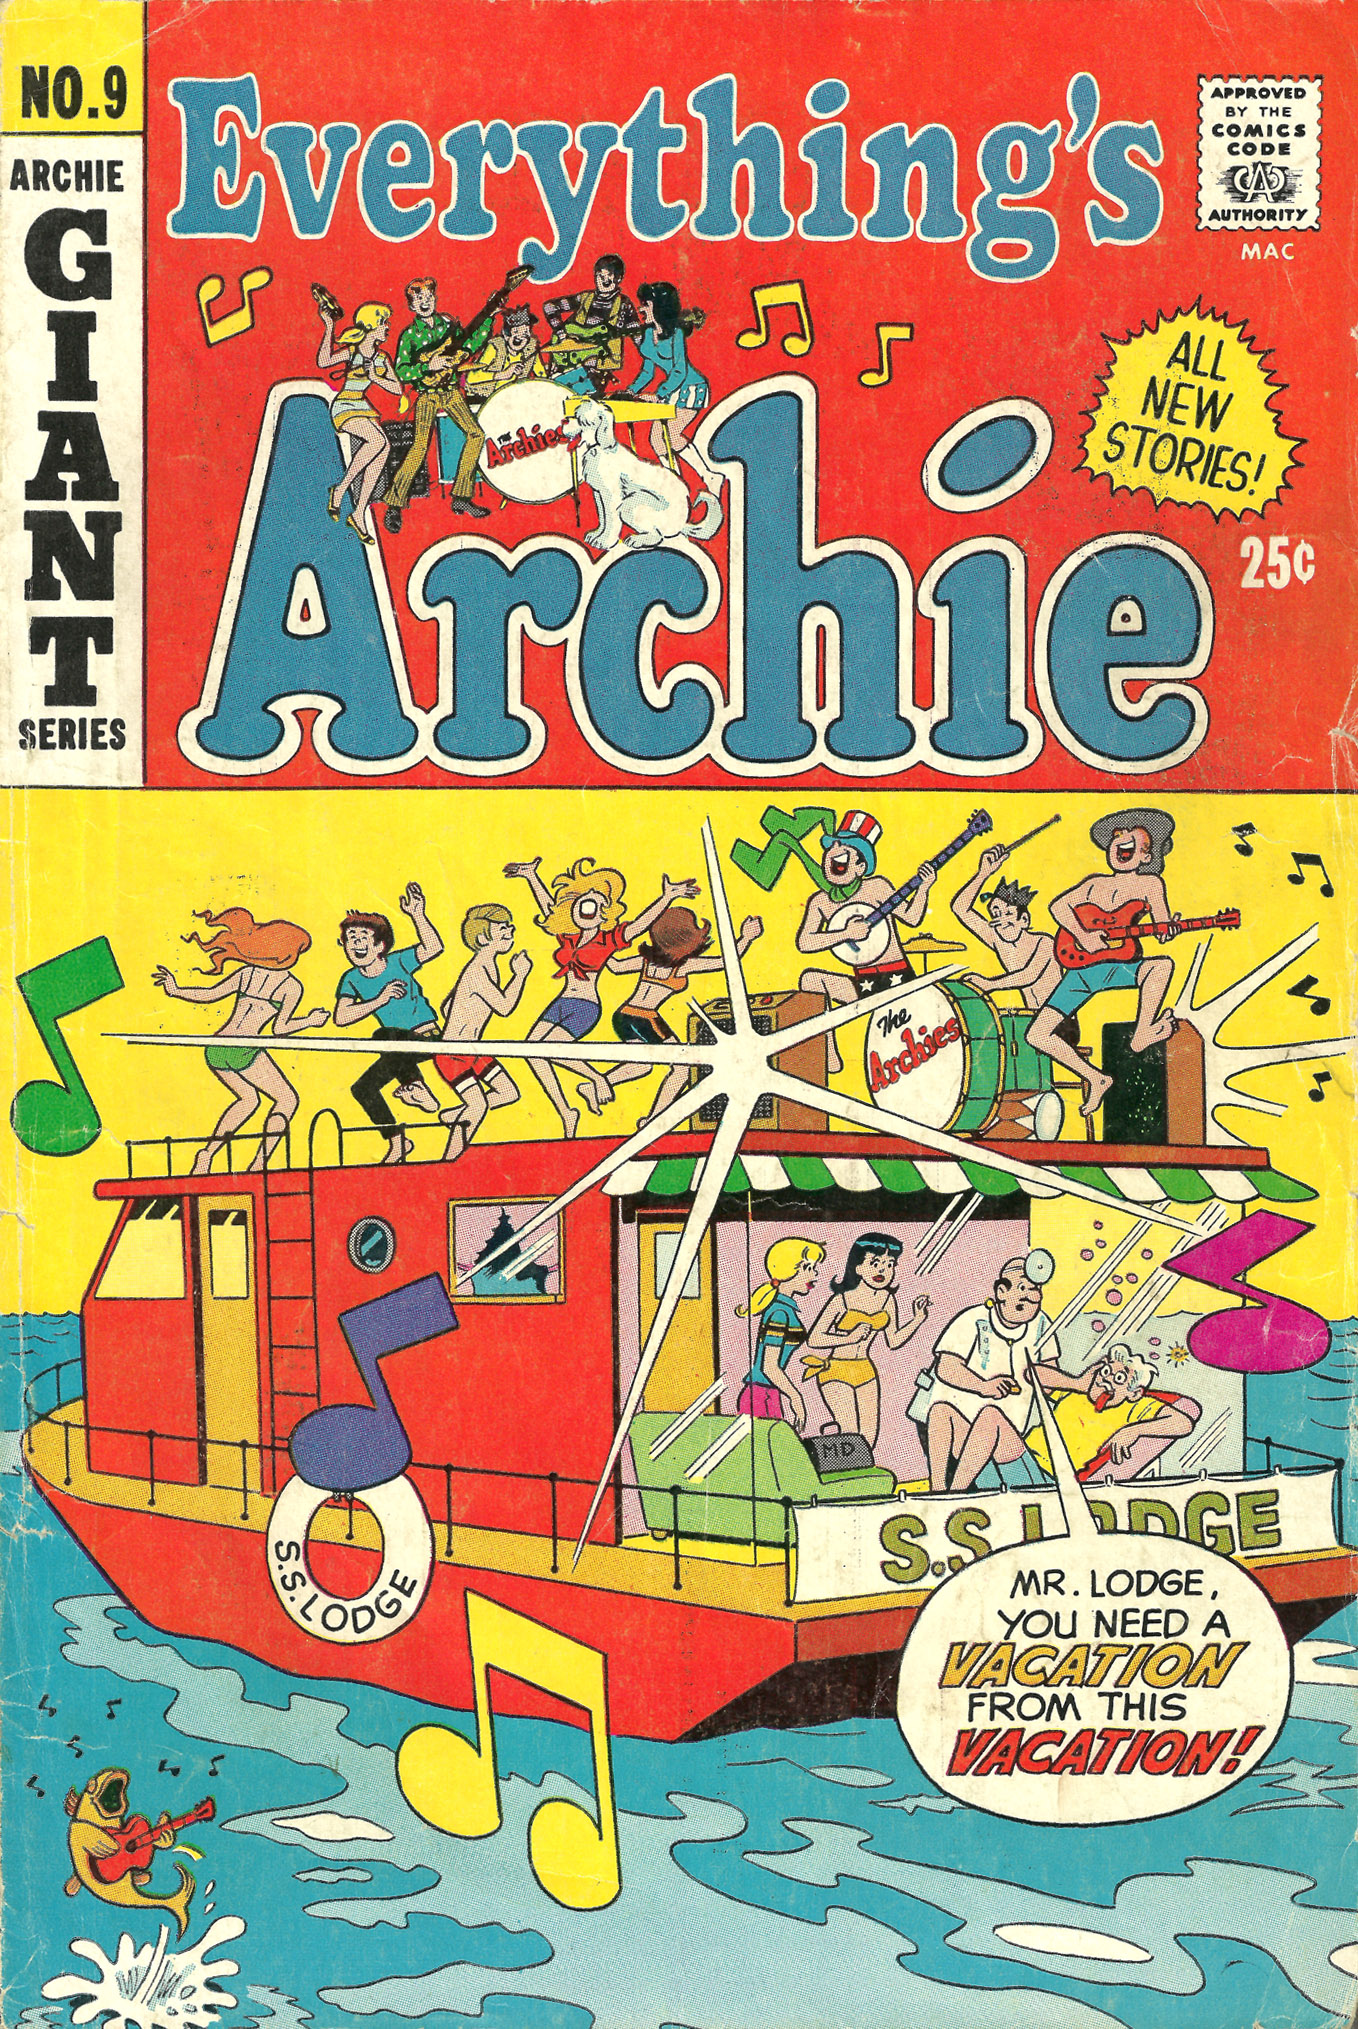 Read online Everything's Archie comic -  Issue #9 - 1